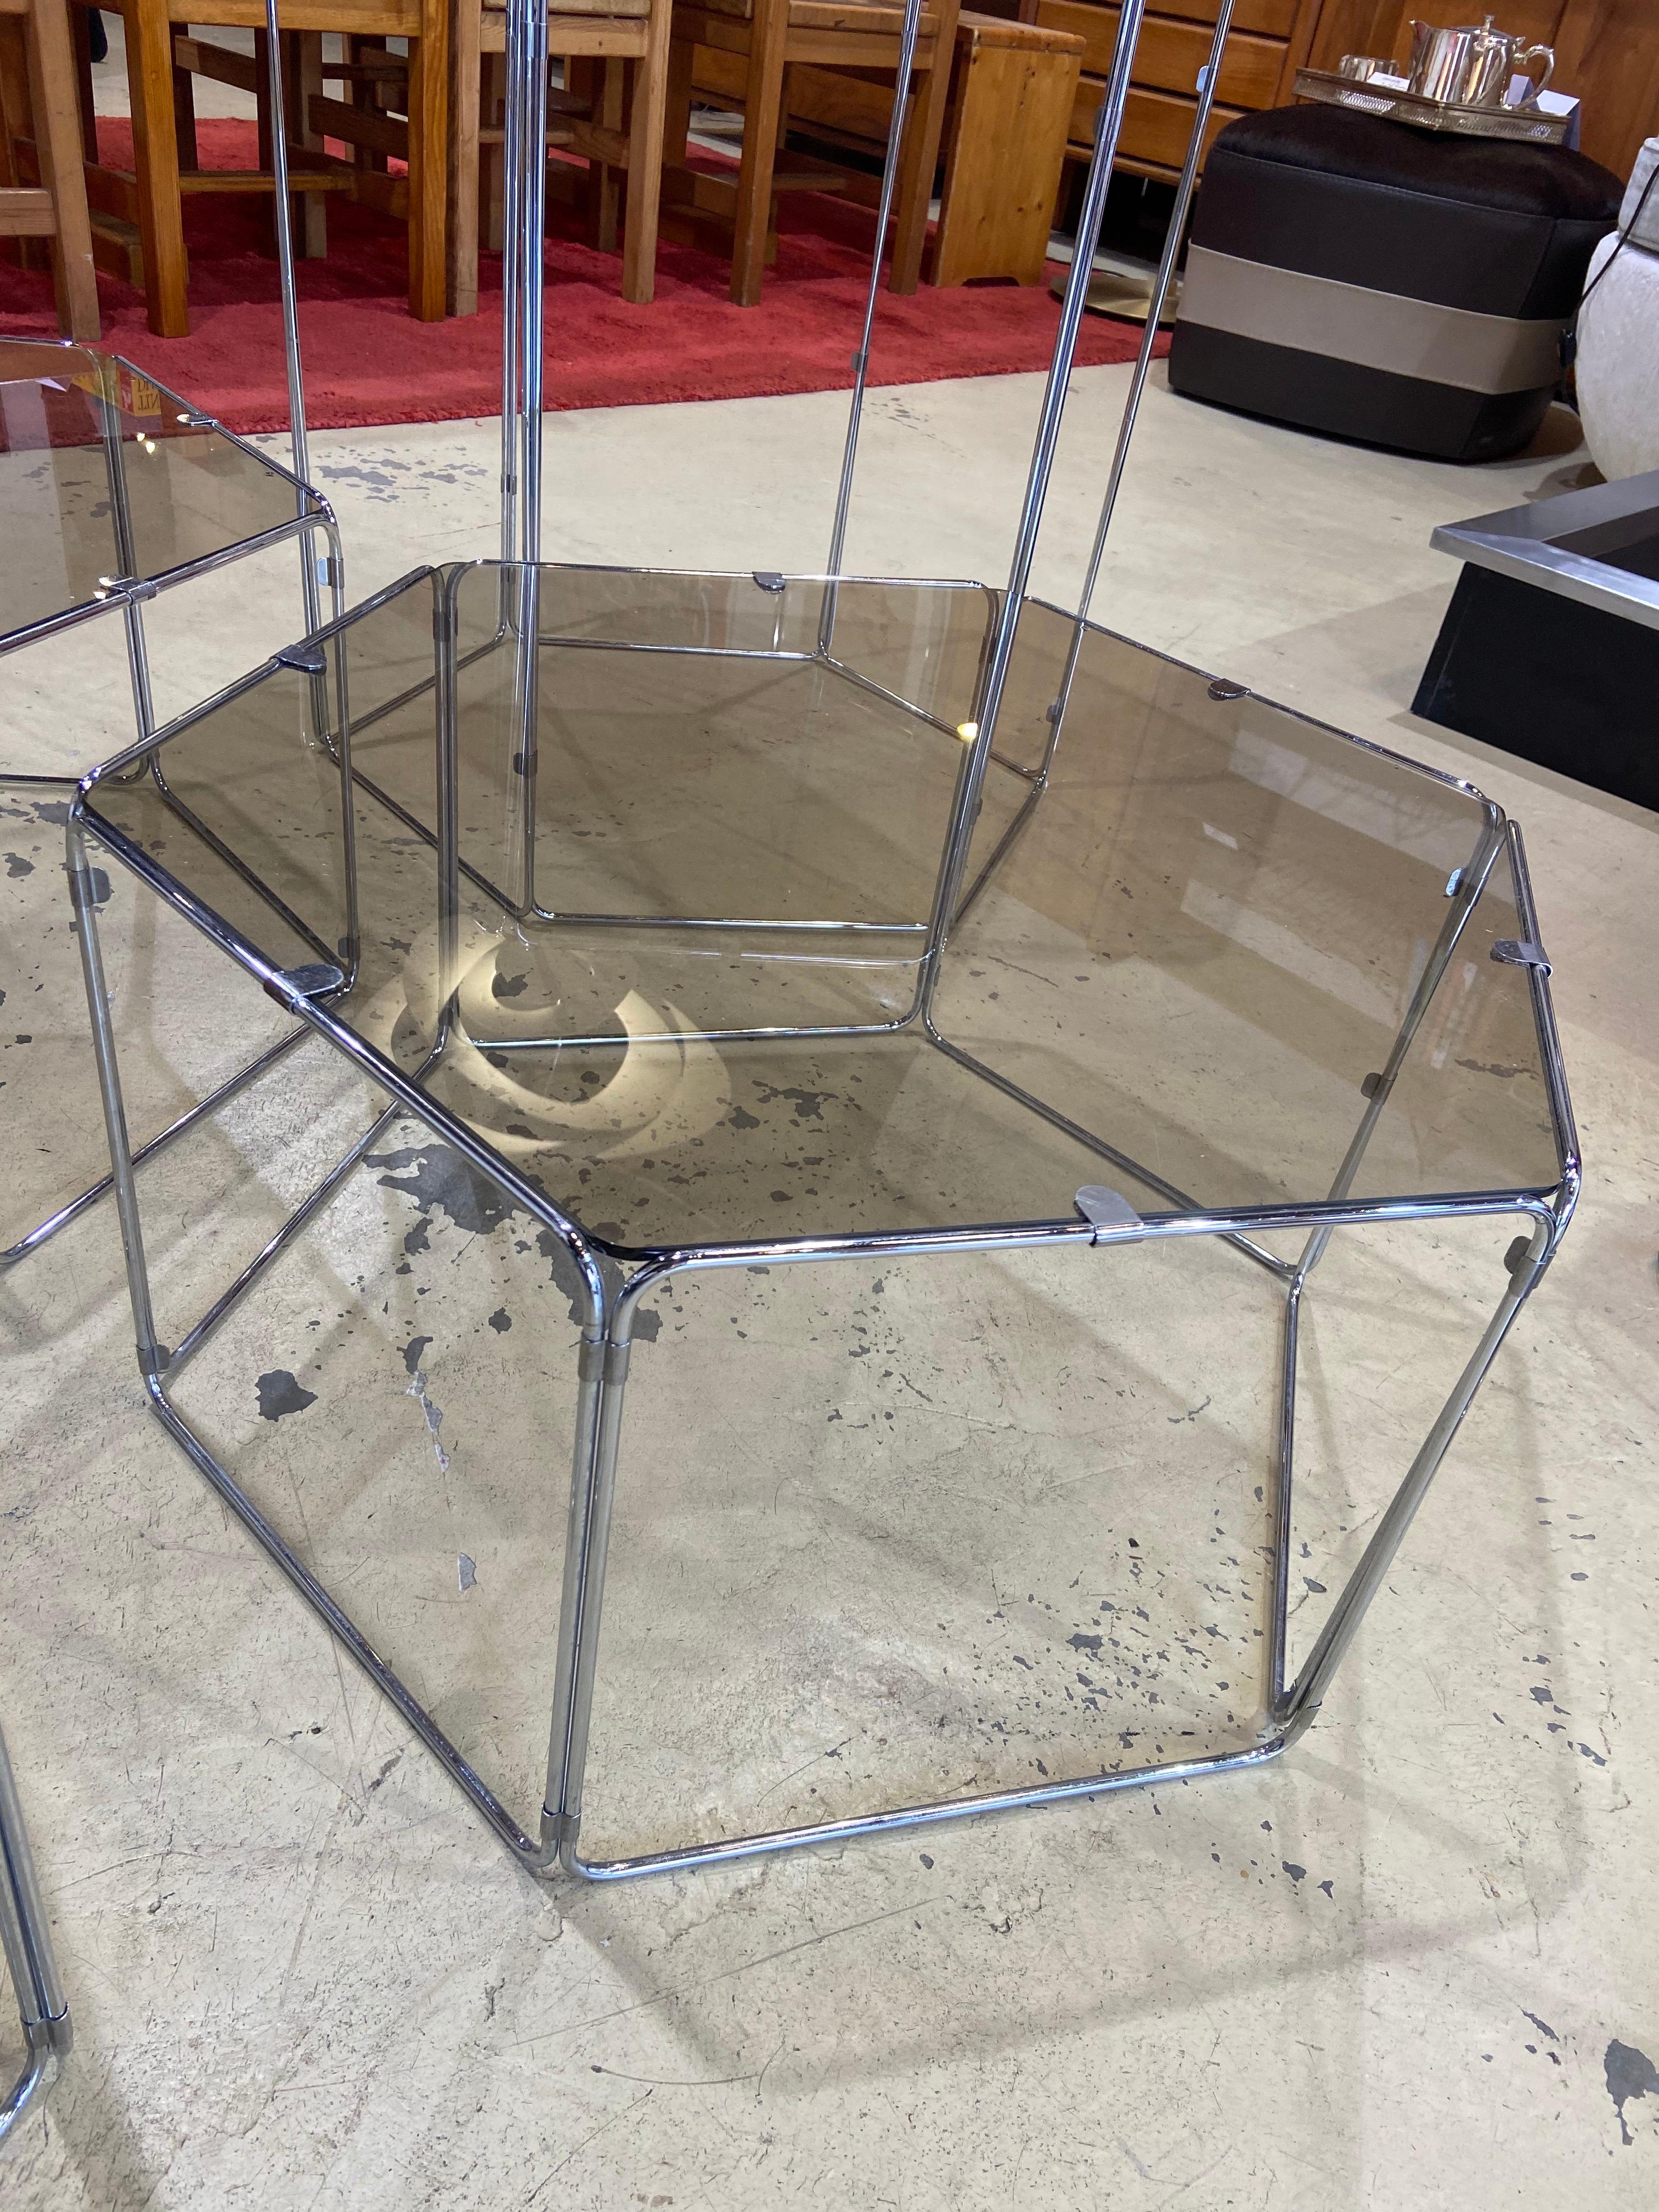 Max Sauze - Set of 4 coffee tables / end tables, 1977.

Stainless steel and glass
Measures: Small: 60 x 53 x H 30 cm 
Large: 60 x 53 x H 60 m 
Good condition.